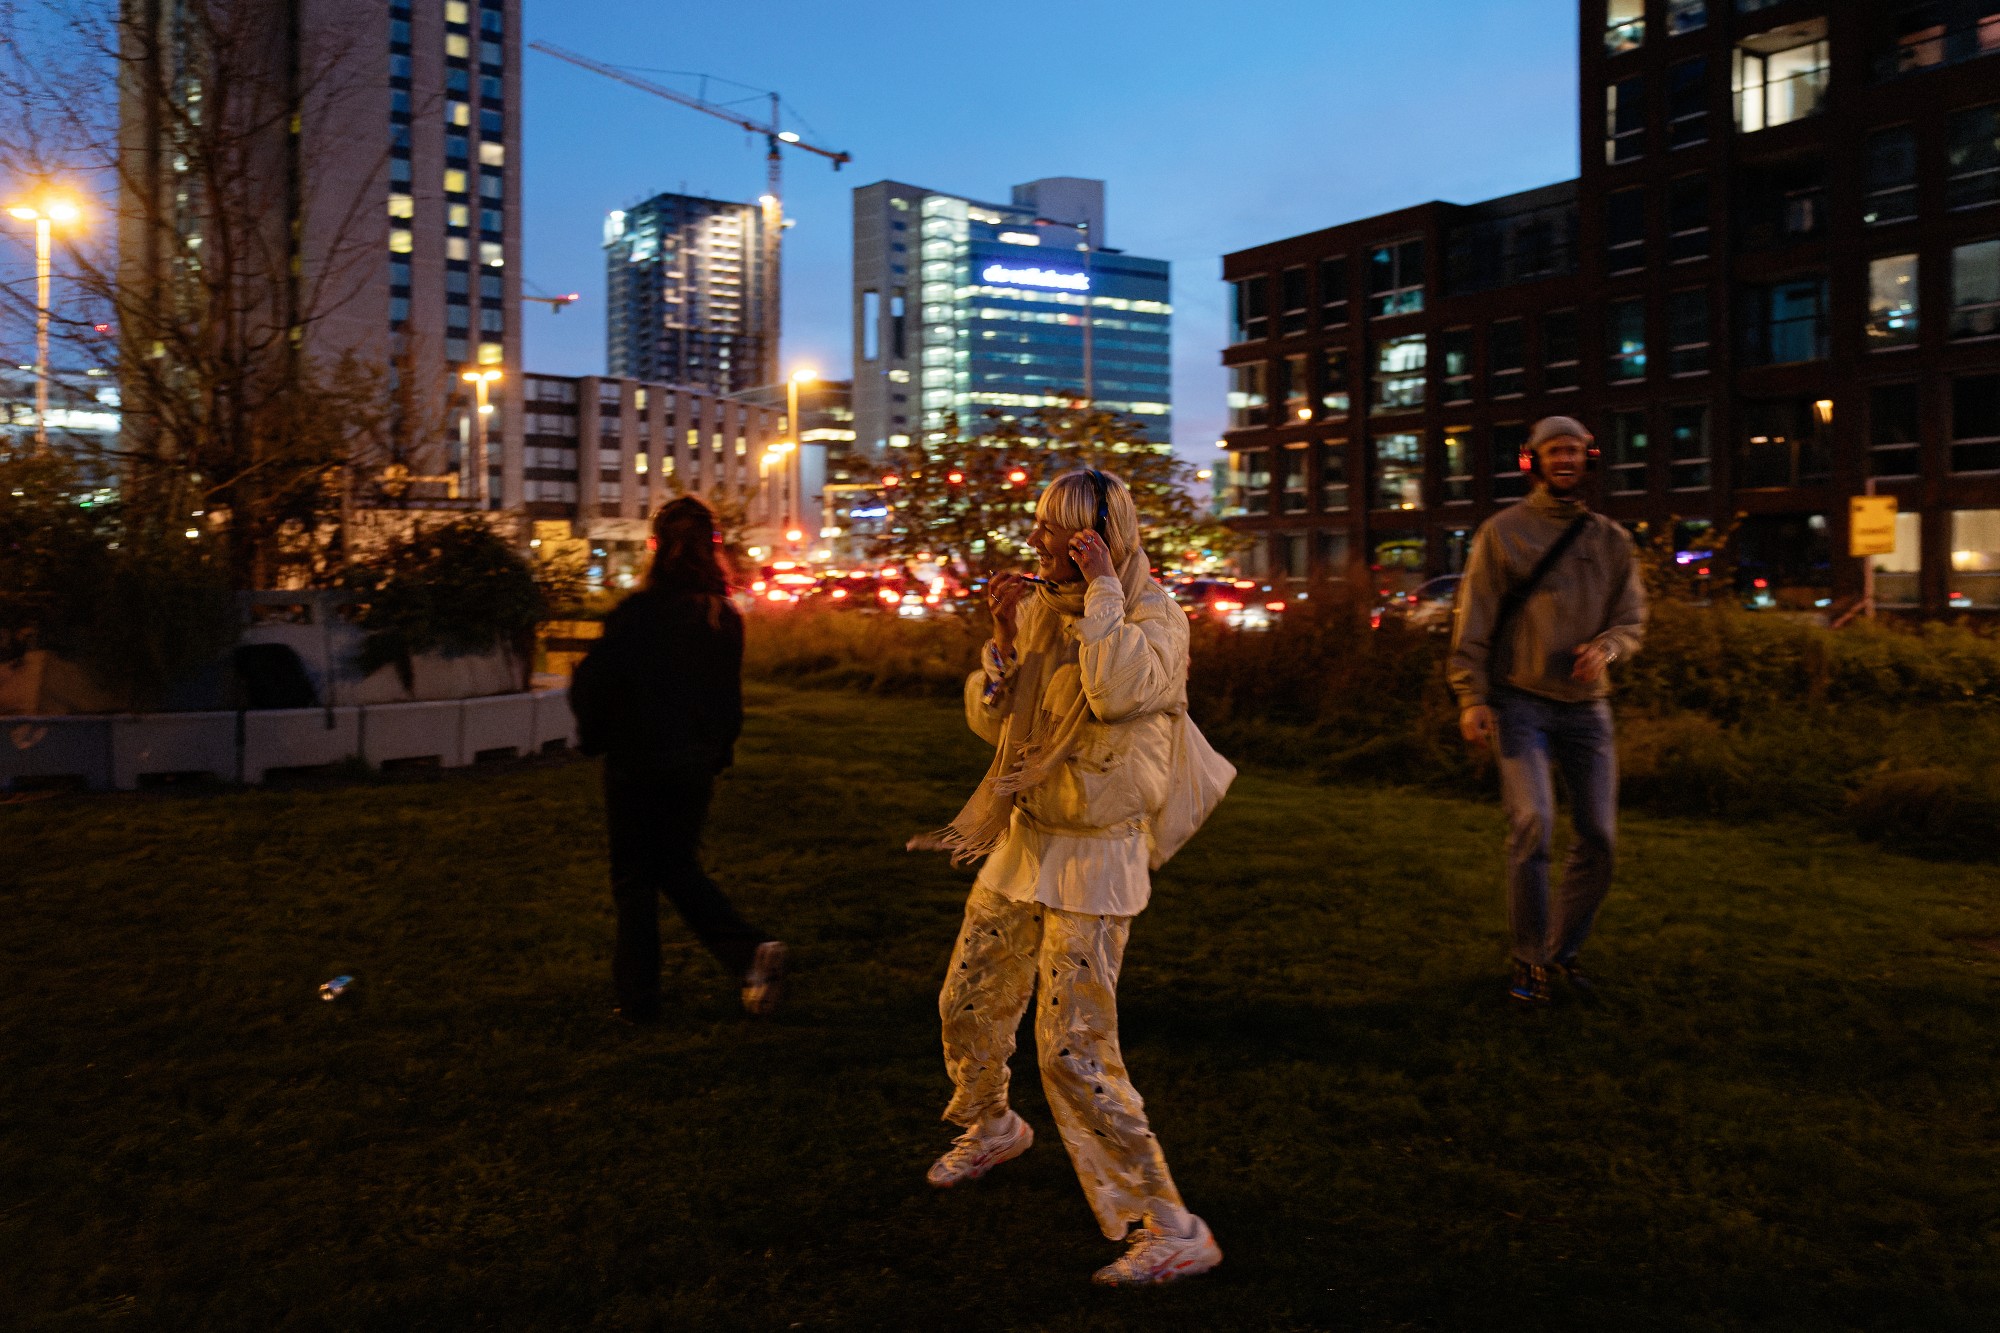 A person fully dressed in beige is dancing, wearing headphones, in the front of the photo. Two other people are behind, with some modern illuminated building in the background